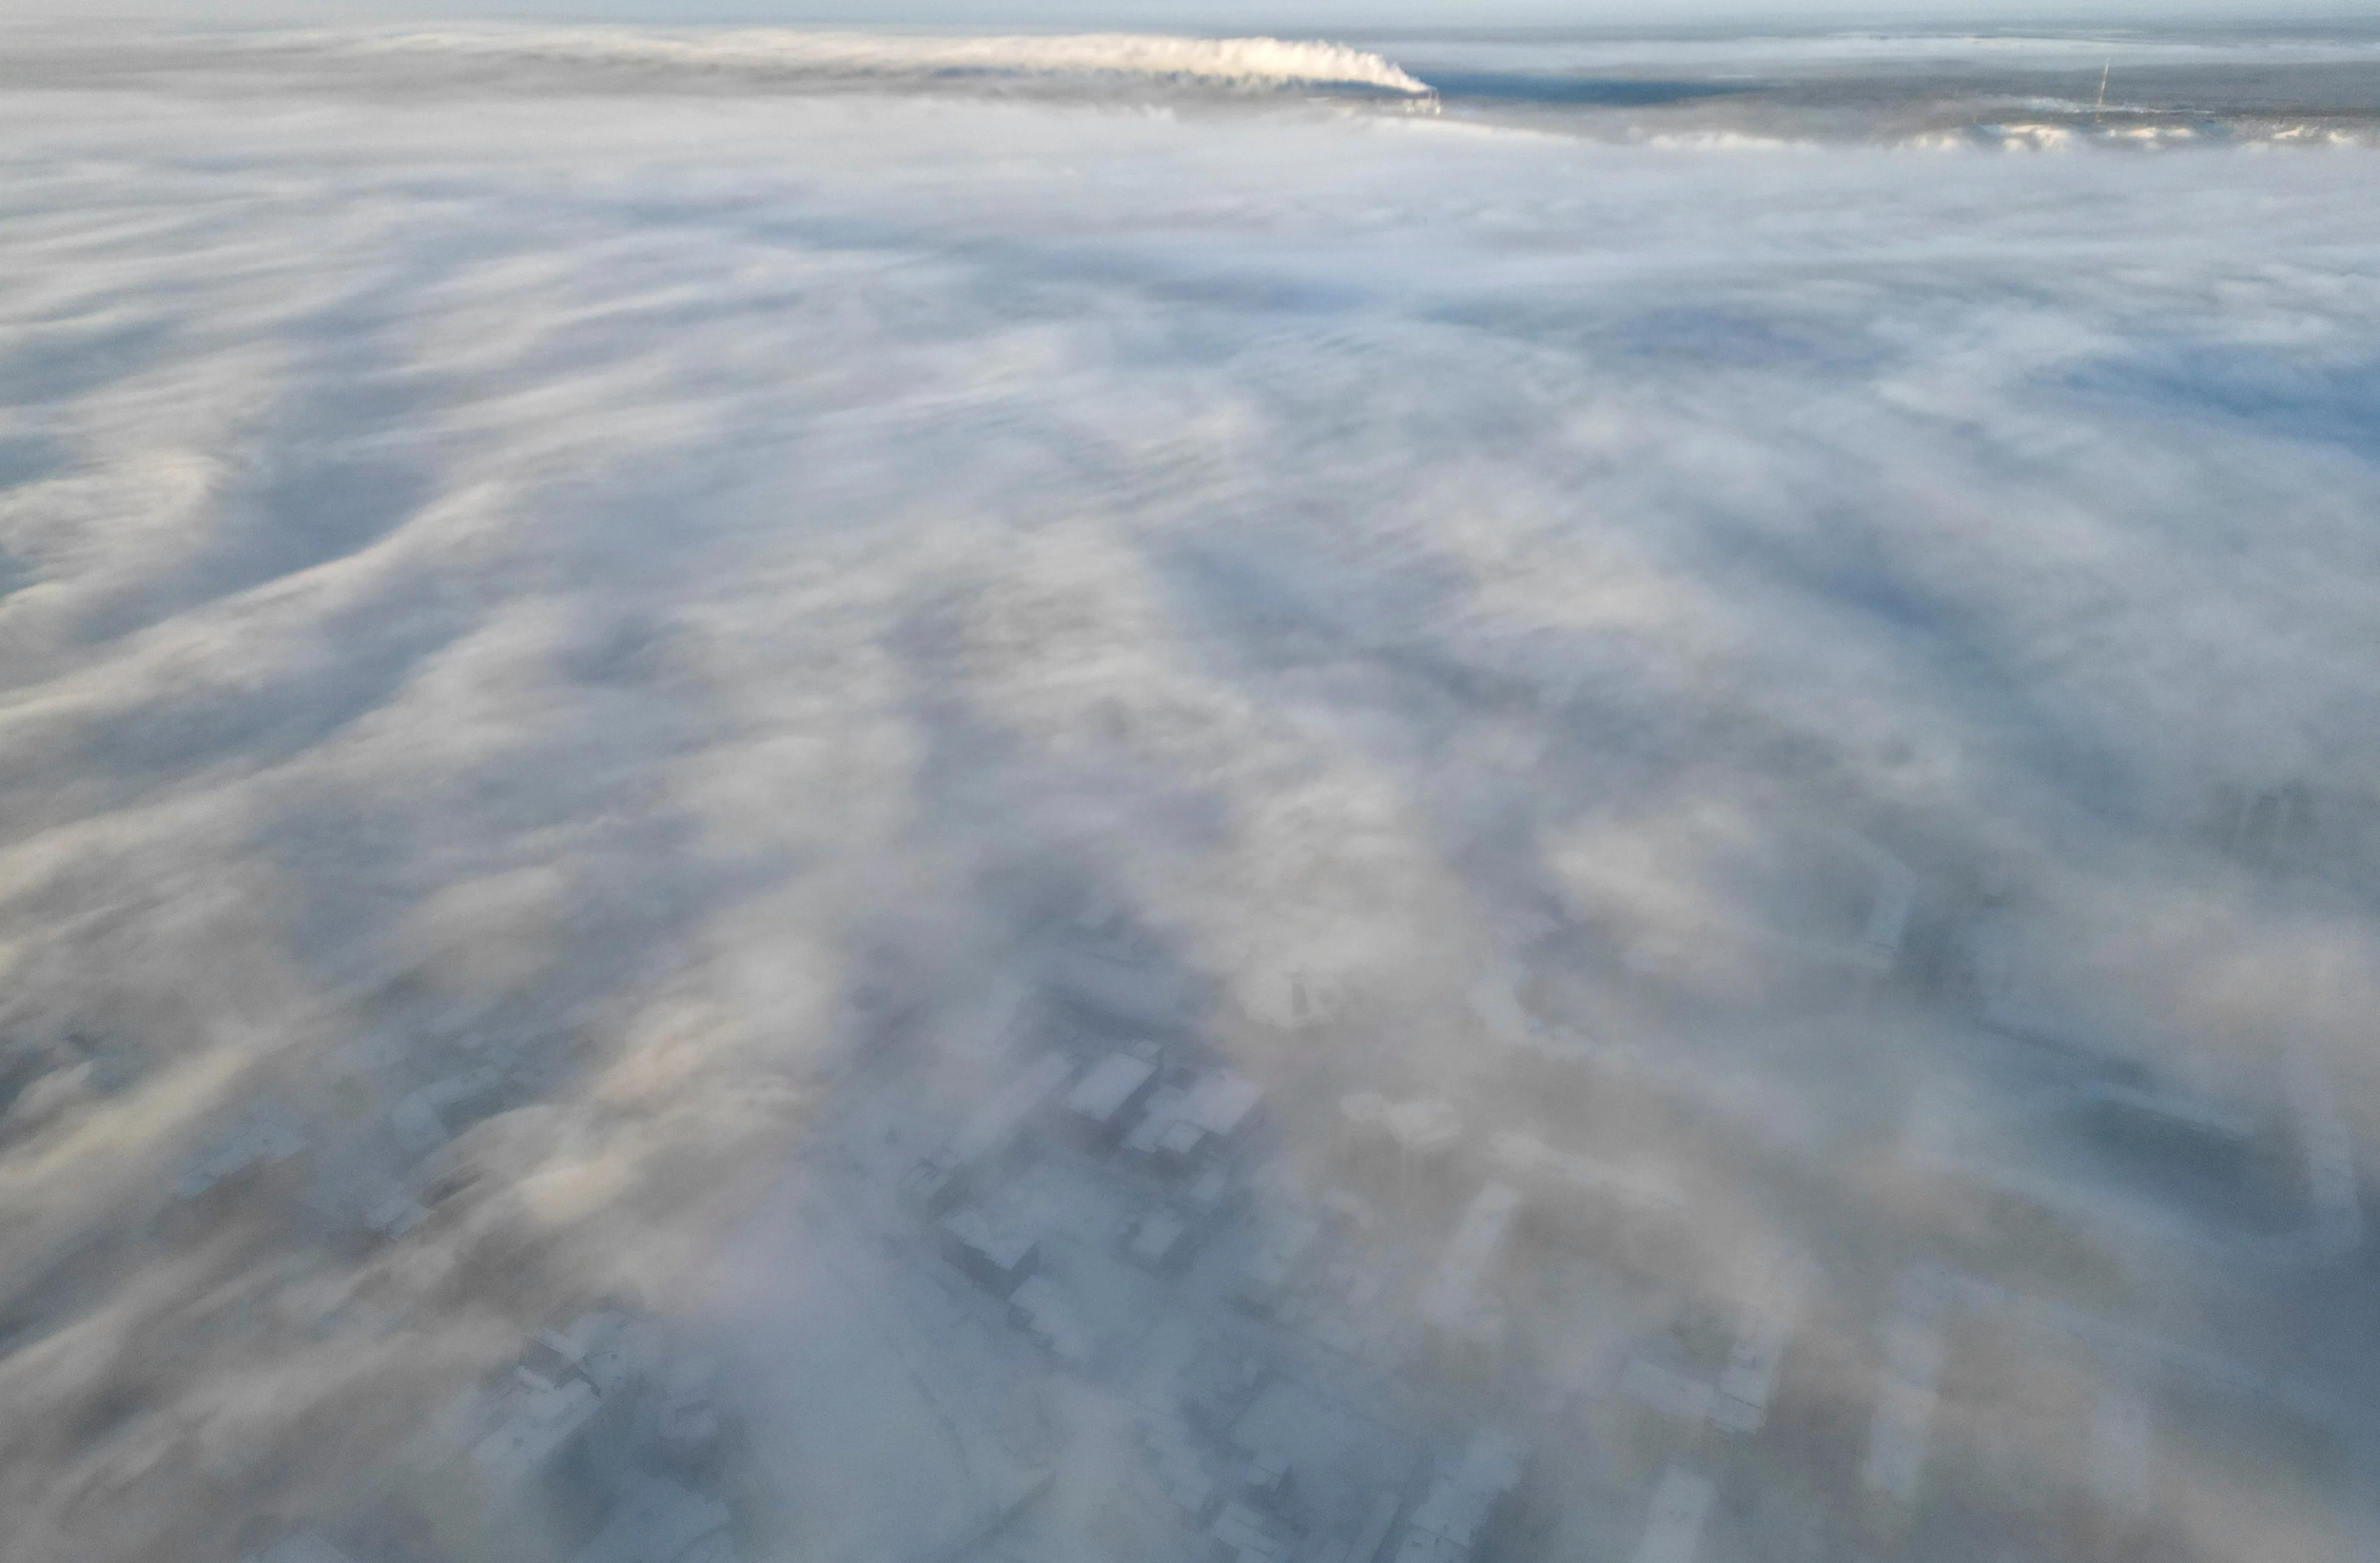 Reuters: An aerial view through clouds and fog shows the city of Yakutsk, Russia, December 5, 2023. Temperatures in parts of the Sakha Republic, also known as Yakutia and located in the northeastern part of Siberia, went below minus 50 degrees Celsius (minus 58 degrees Fahrenheit) on December 5. REUTERS/Roman Kutukov